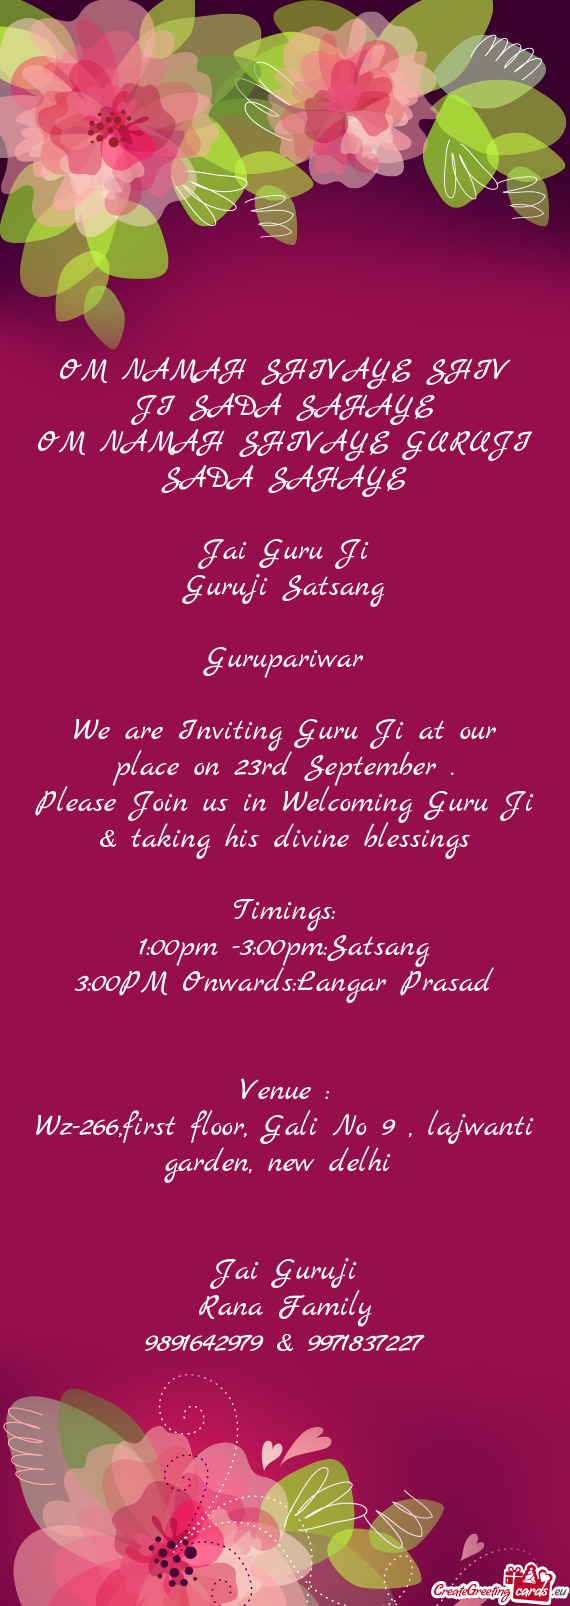 We are Inviting Guru Ji at our place on 23rd September